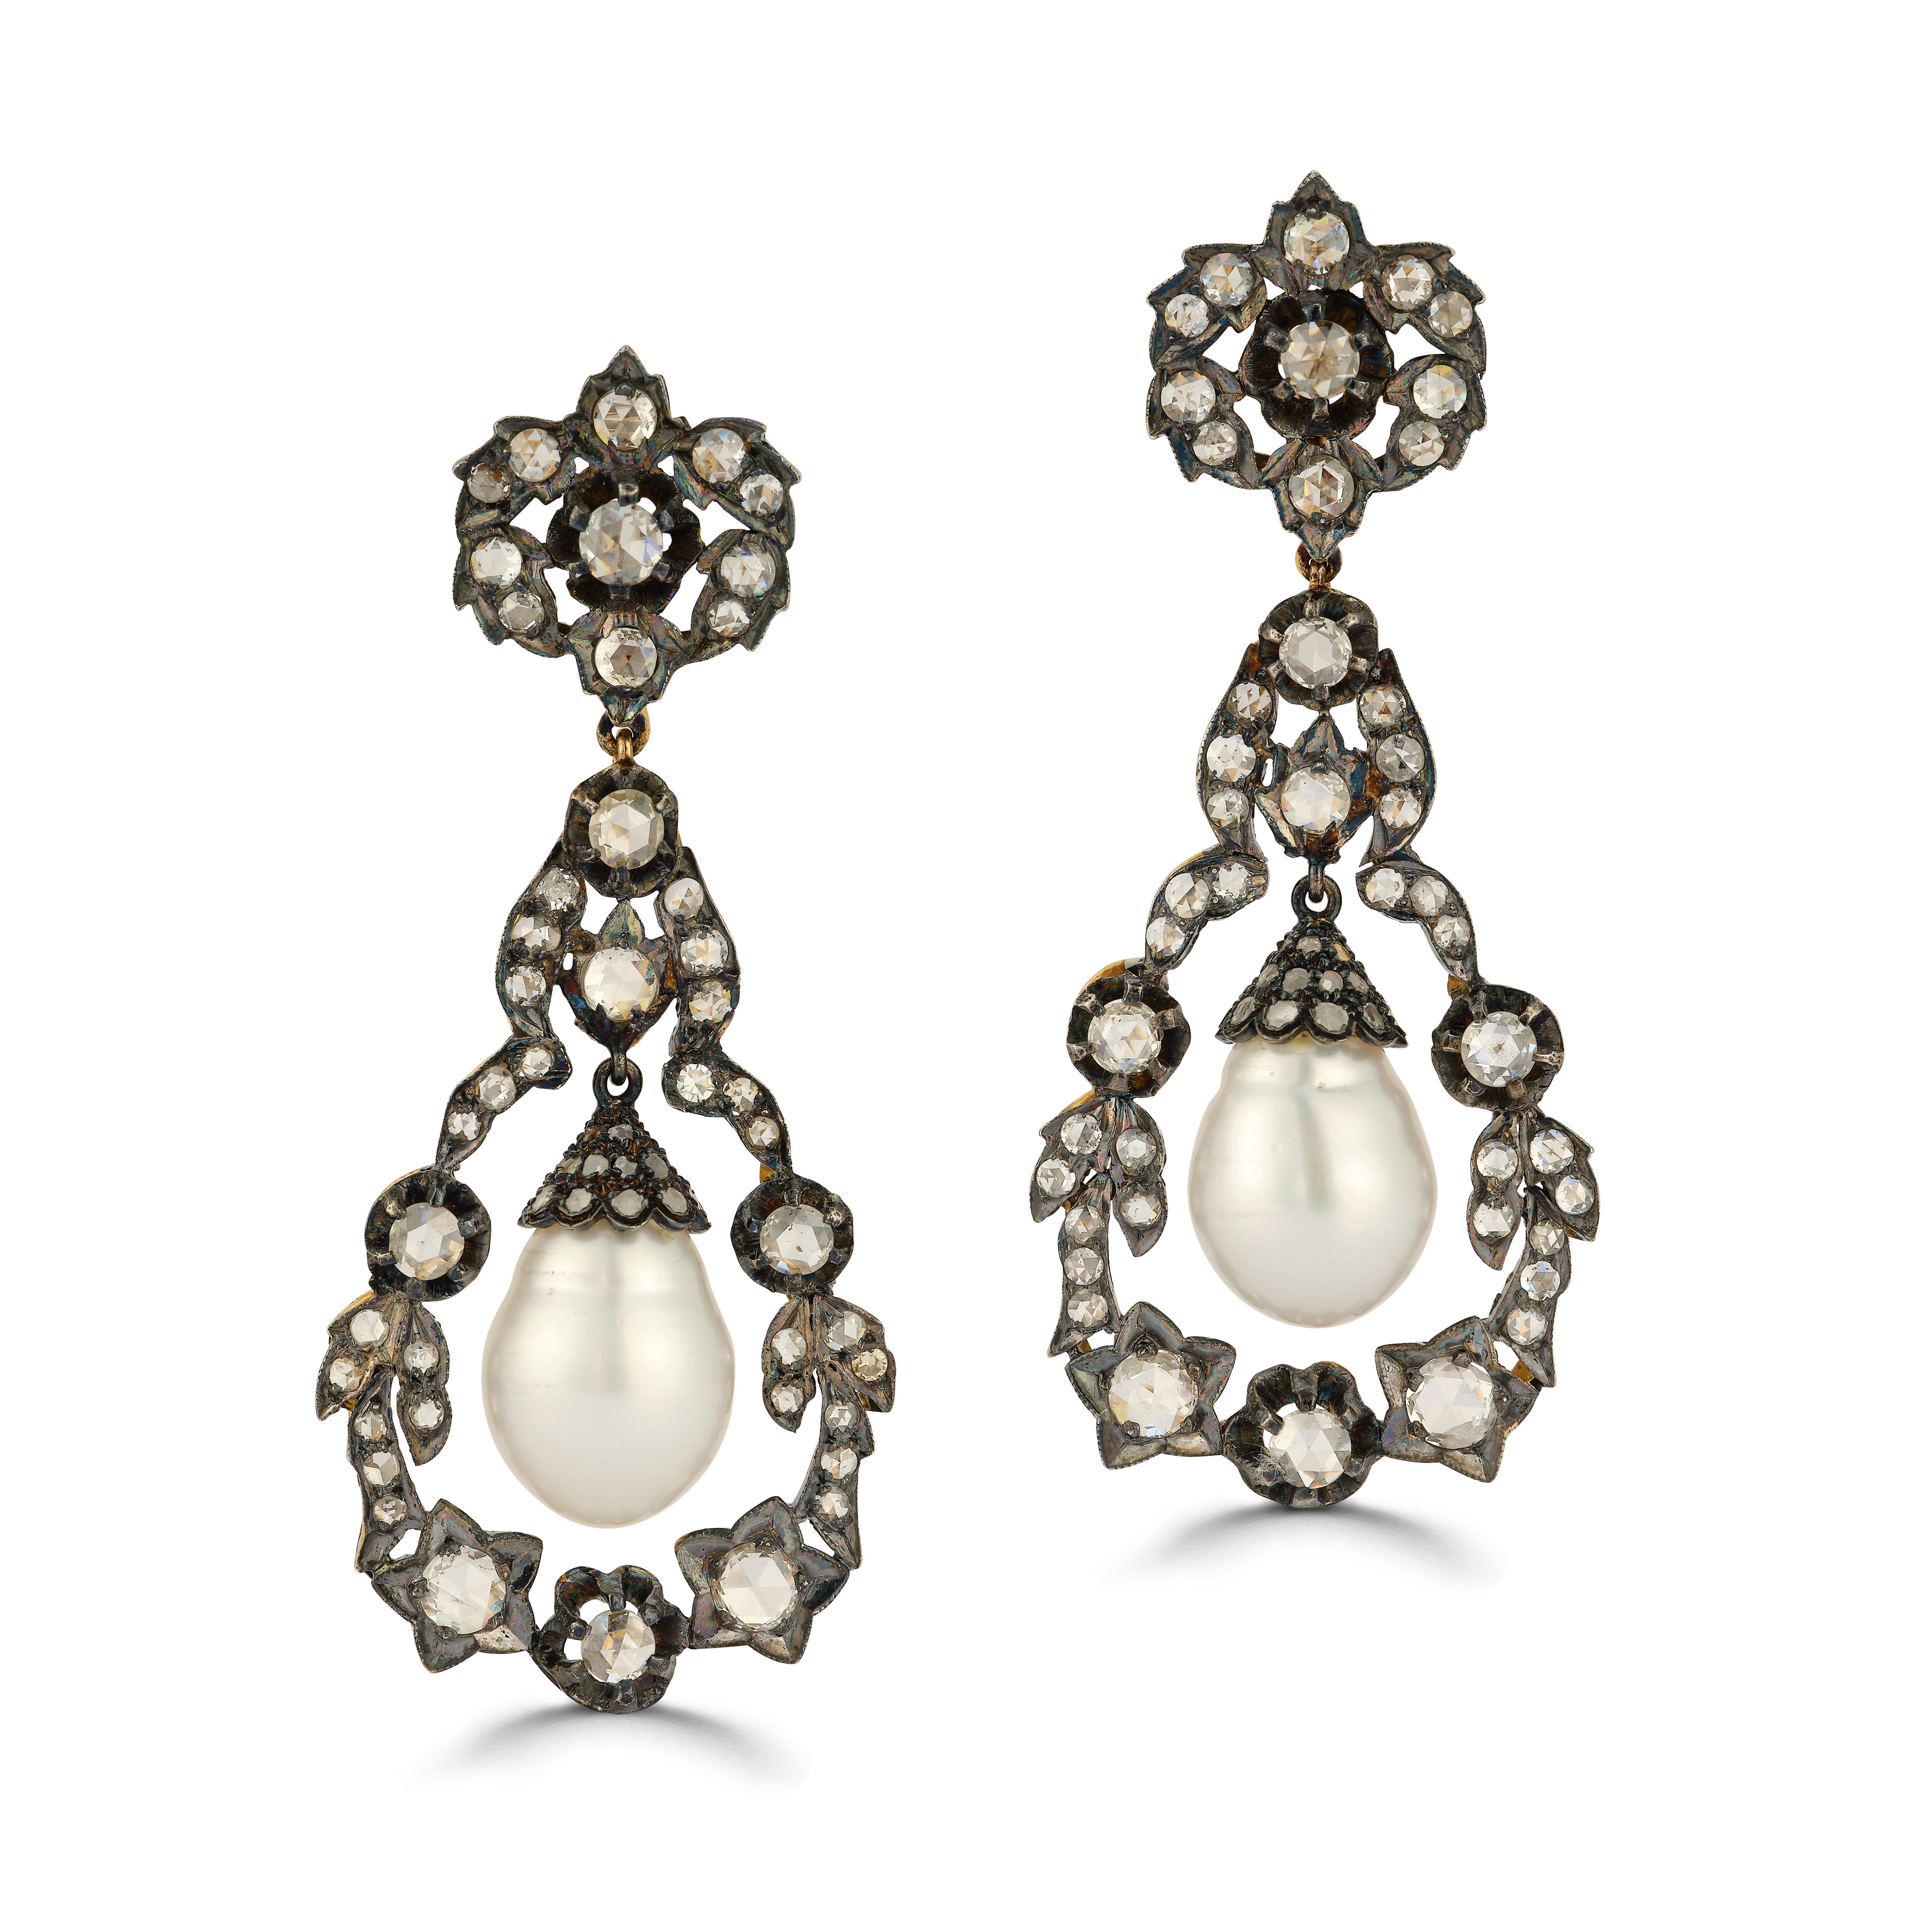 Pearl & Diamond Earrings

Diamond total approximate weight: 7.0ct

Yellow gold and silver clip on with post earrings each set with a pearl diamonds

Diamond total approximate weight: 7.0ct

Pearls Measurements: 16.8mm x 12mm & 17.5mm x 12mm

Metal